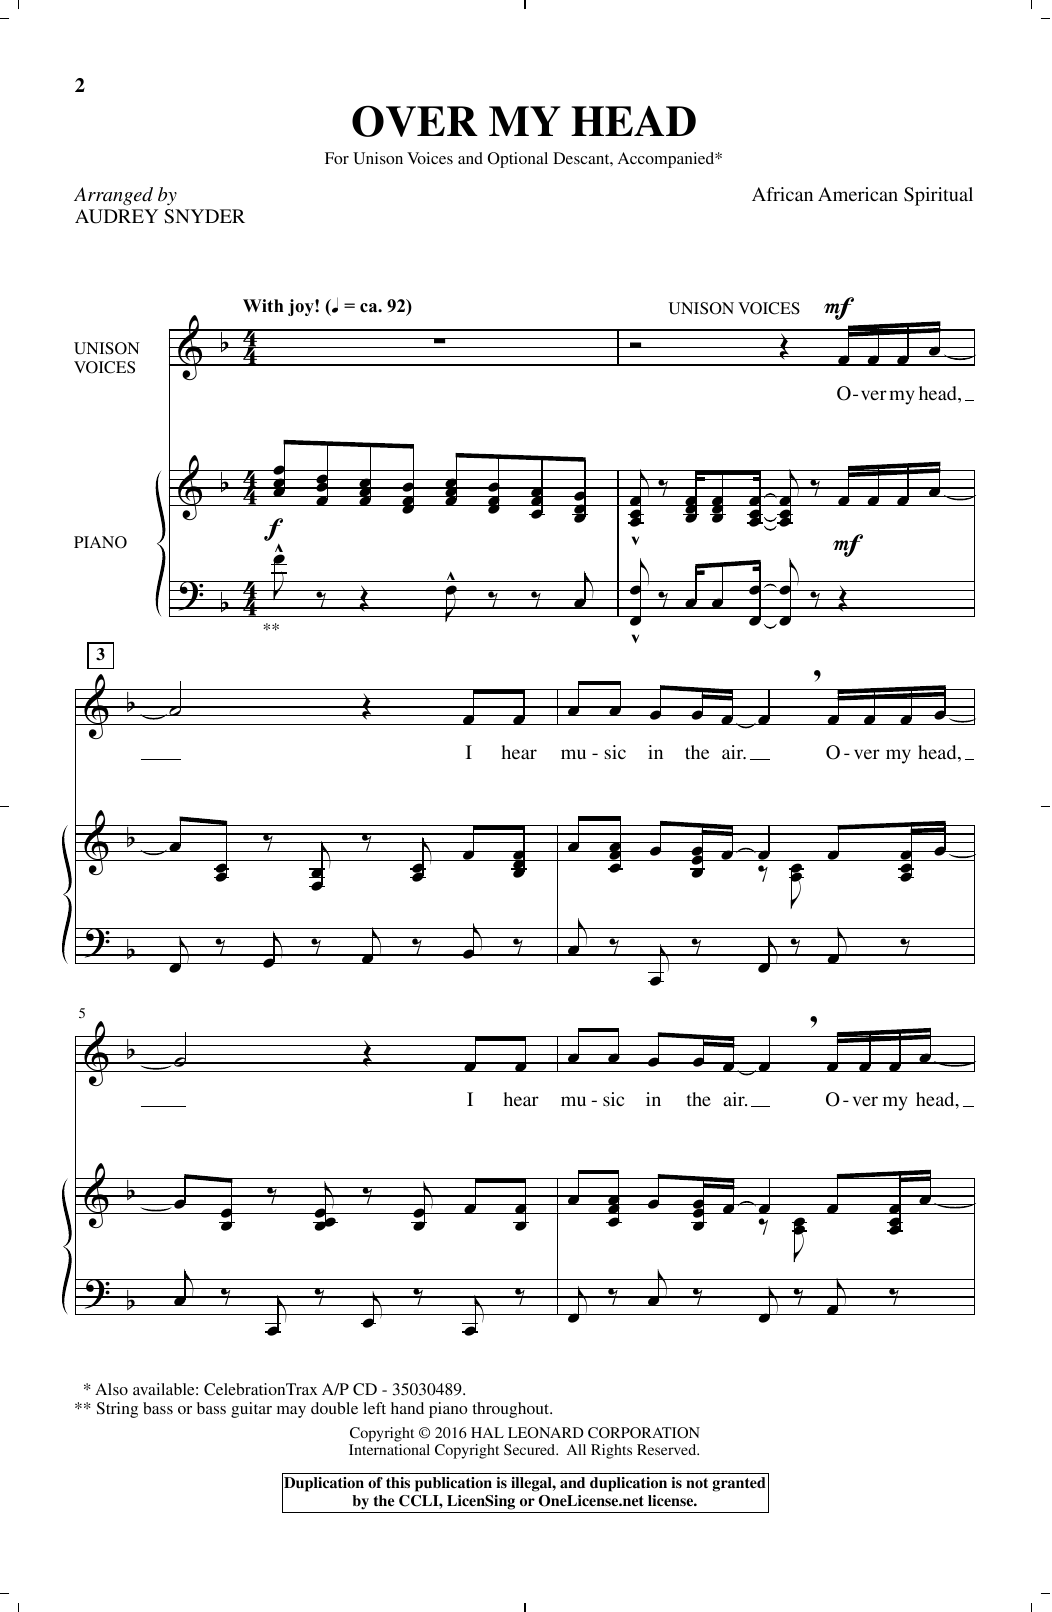 African-American Spiritual Over My Head (arr. Audrey Snyder) sheet music notes and chords. Download Printable PDF.